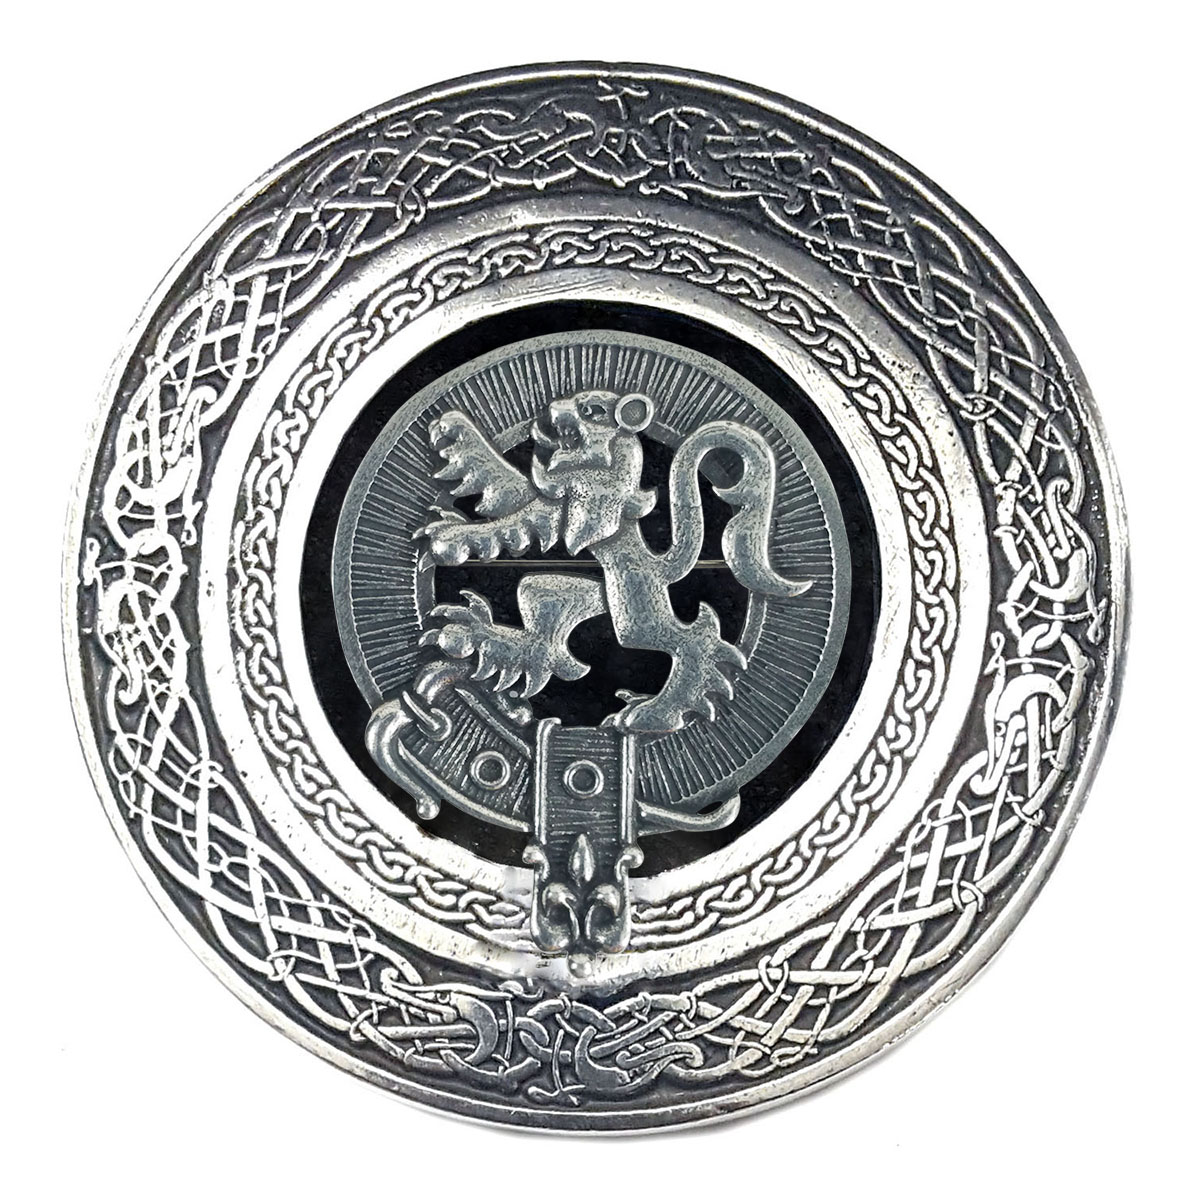 A Rampant Lion Round Pewter Kilt Belt Buckle featuring a silver image of a Scottish lion.